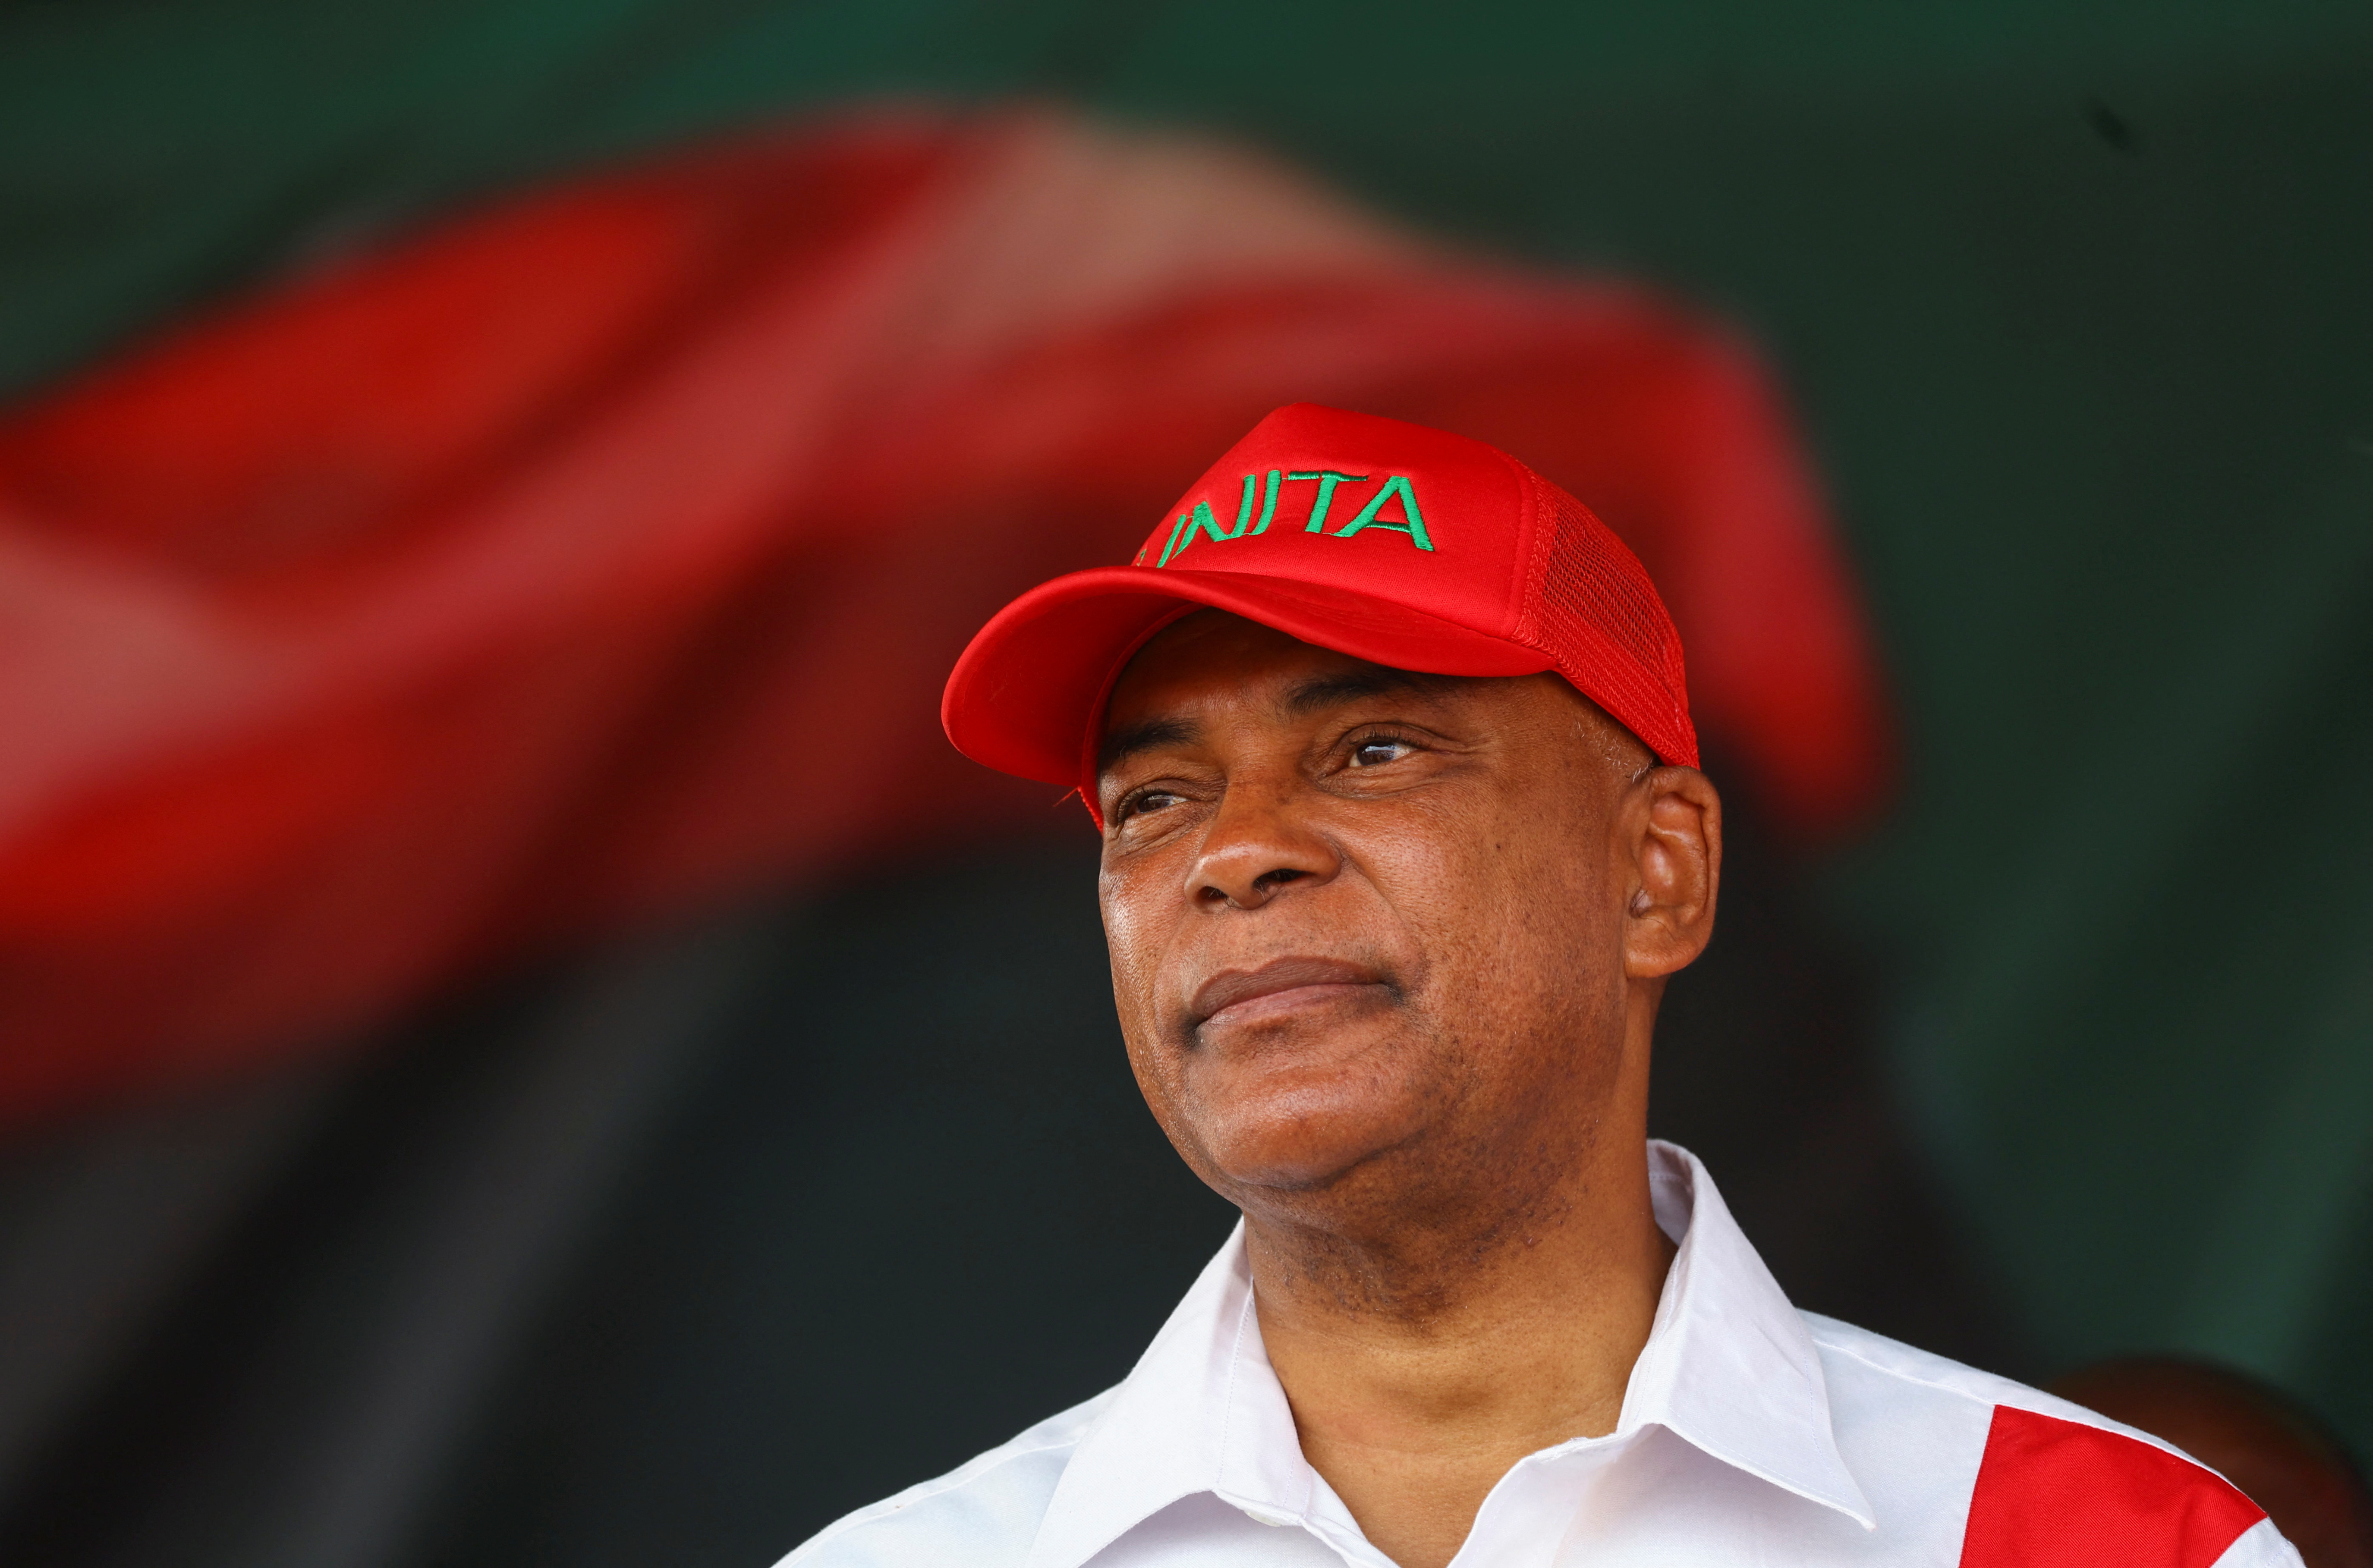 Angola opposition party UNITA holds final rally